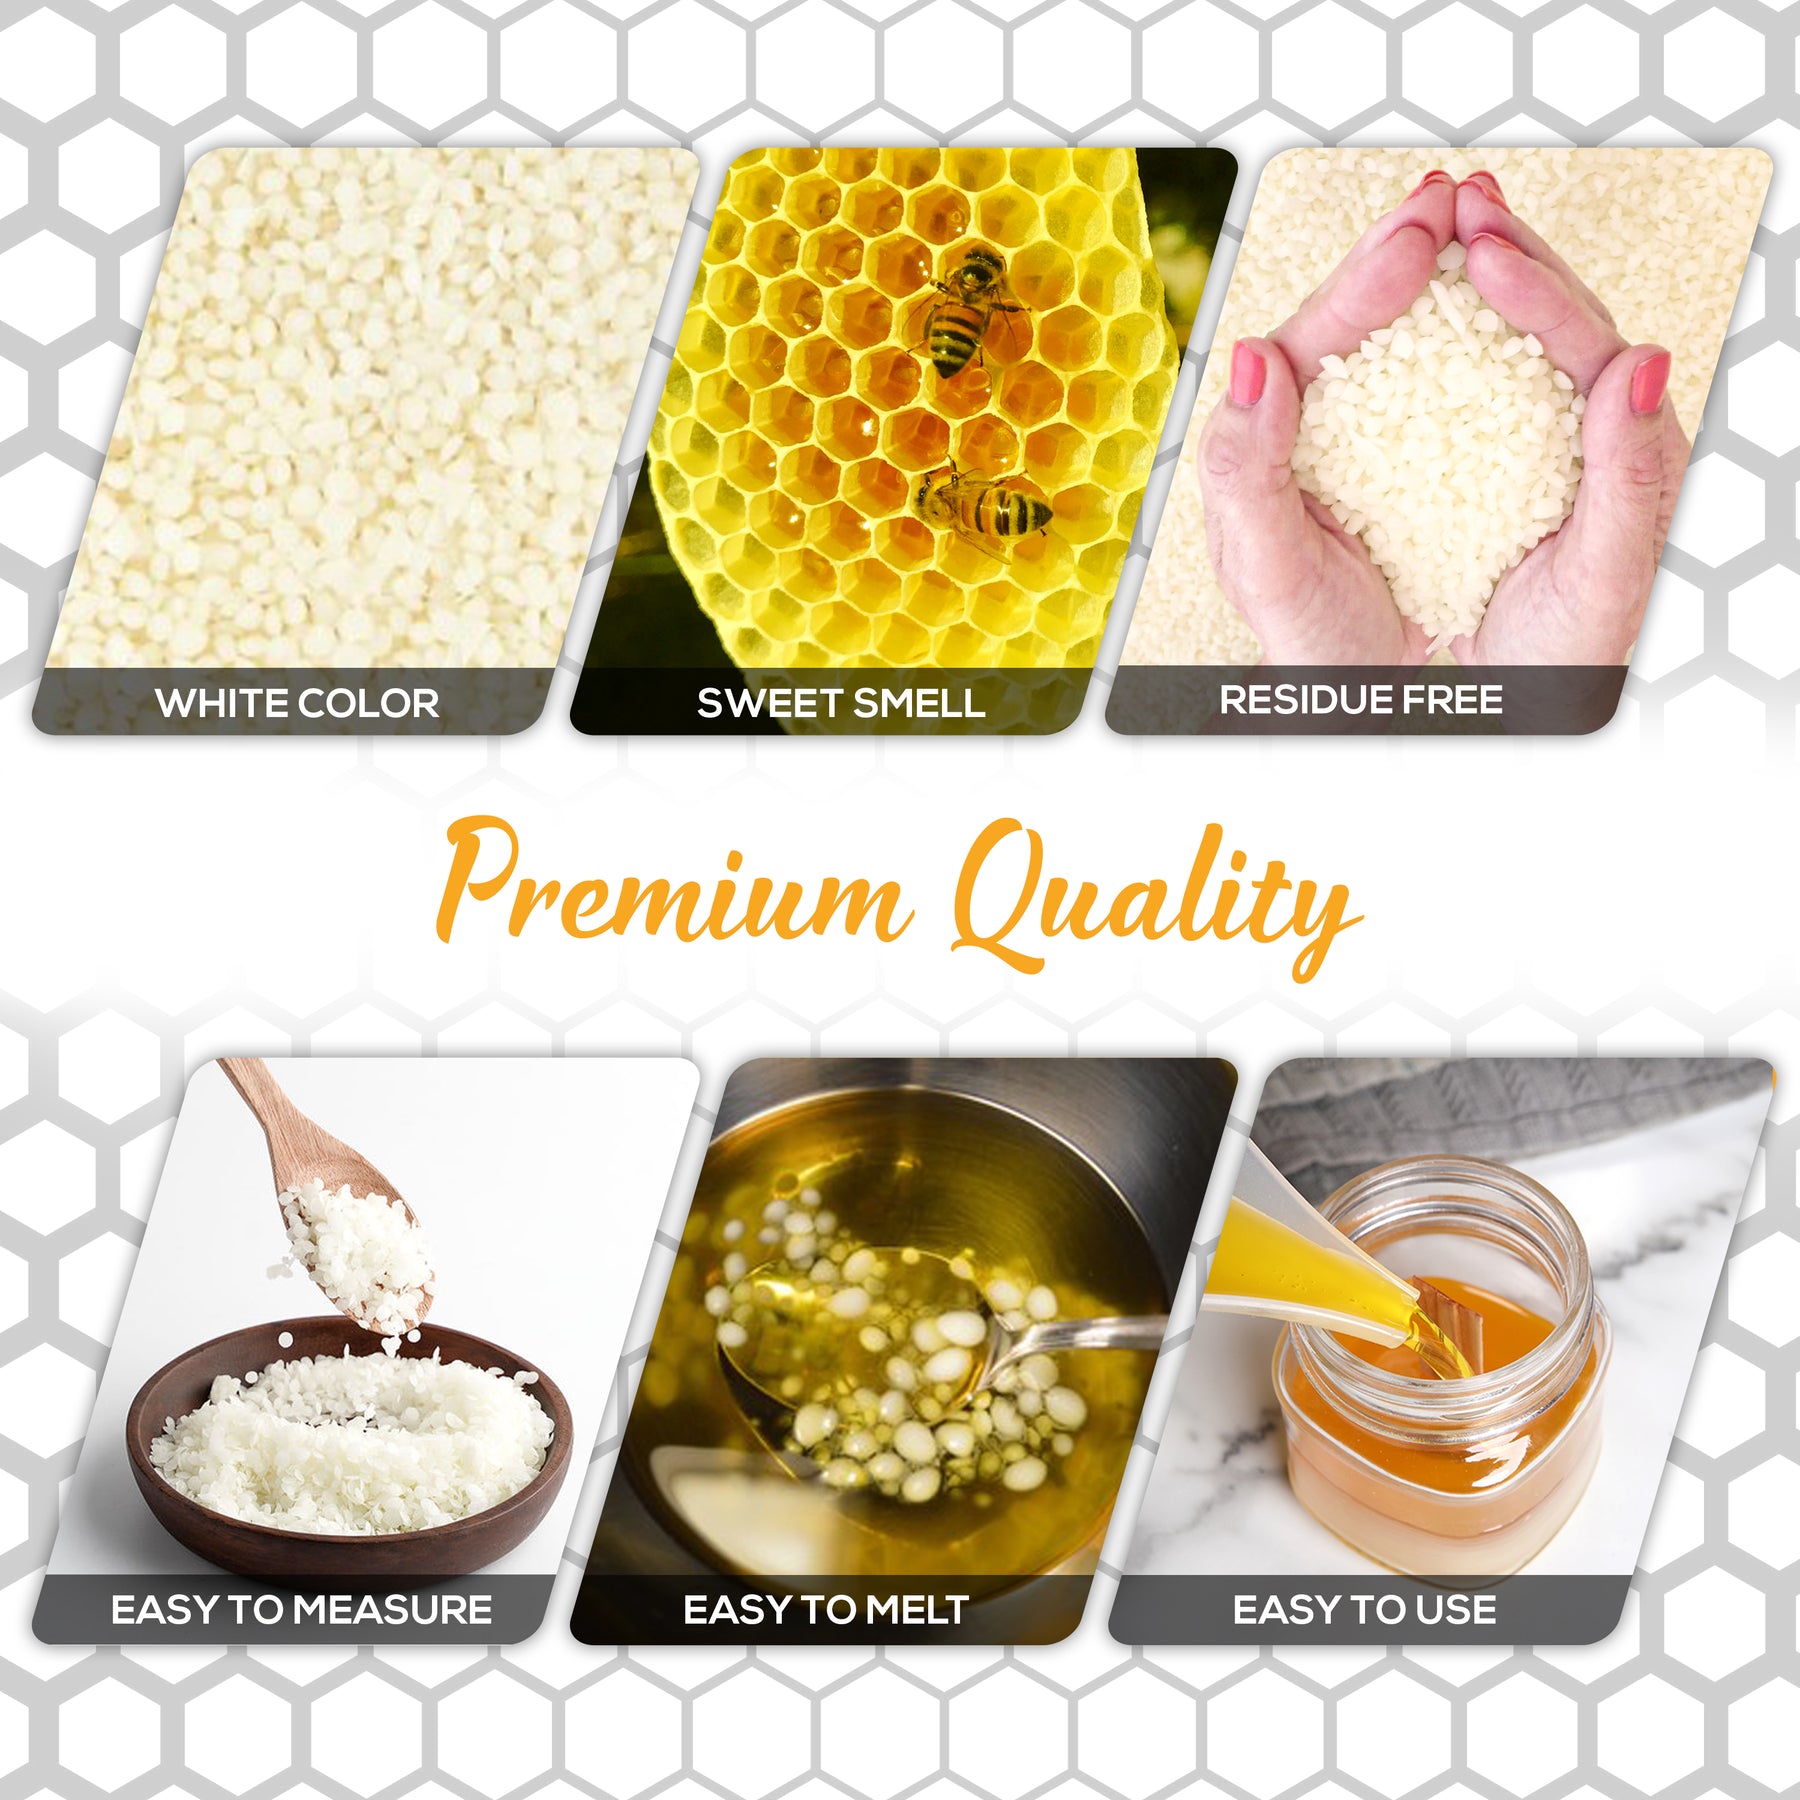 White Beeswax - Buy Beeswax Pellets